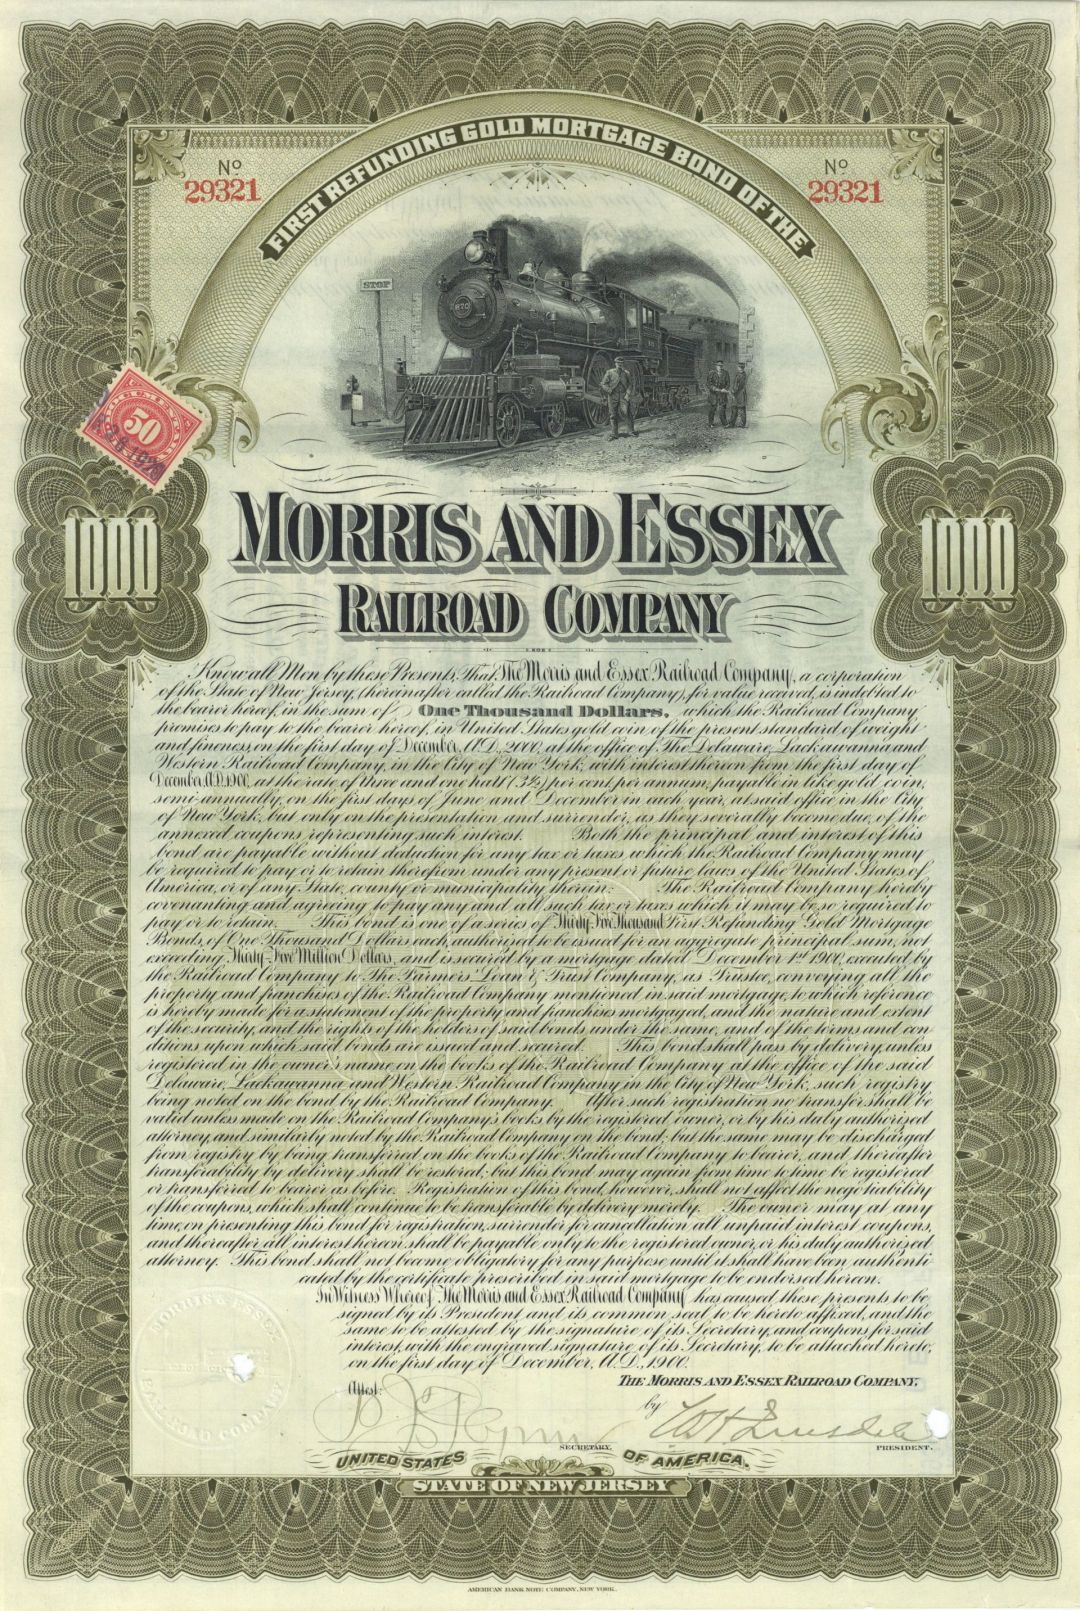 Morris and Essex Railroad Co. - 1900 dated $1,000 Railway Gold Mortgage Bond